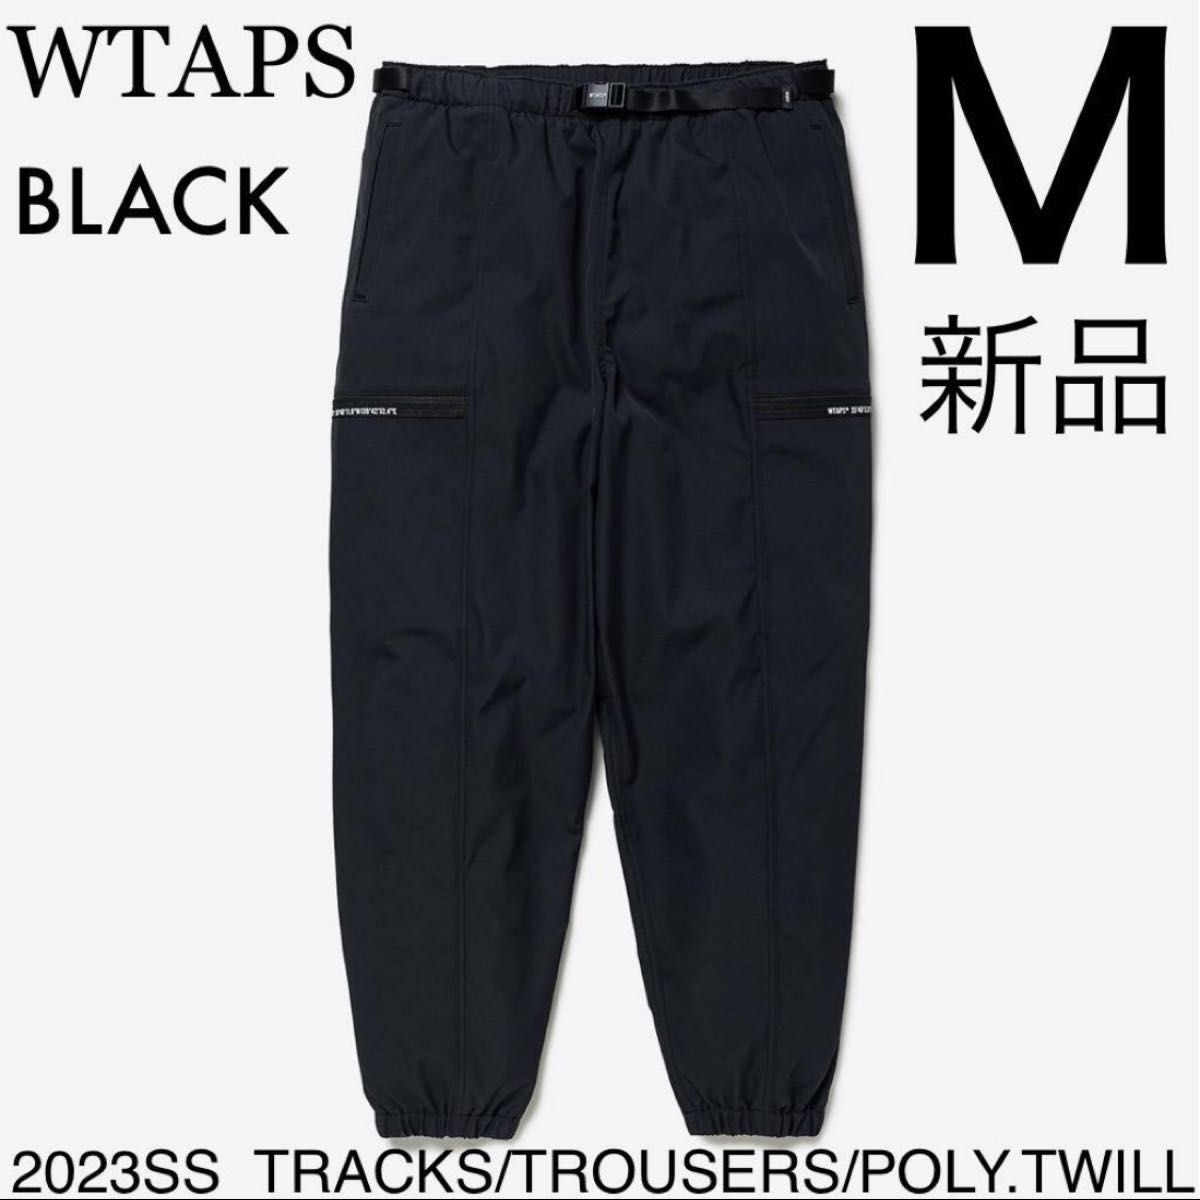 WTAPS EX36 COLLECTION TRACKS Ssize black｜PayPayフリマ